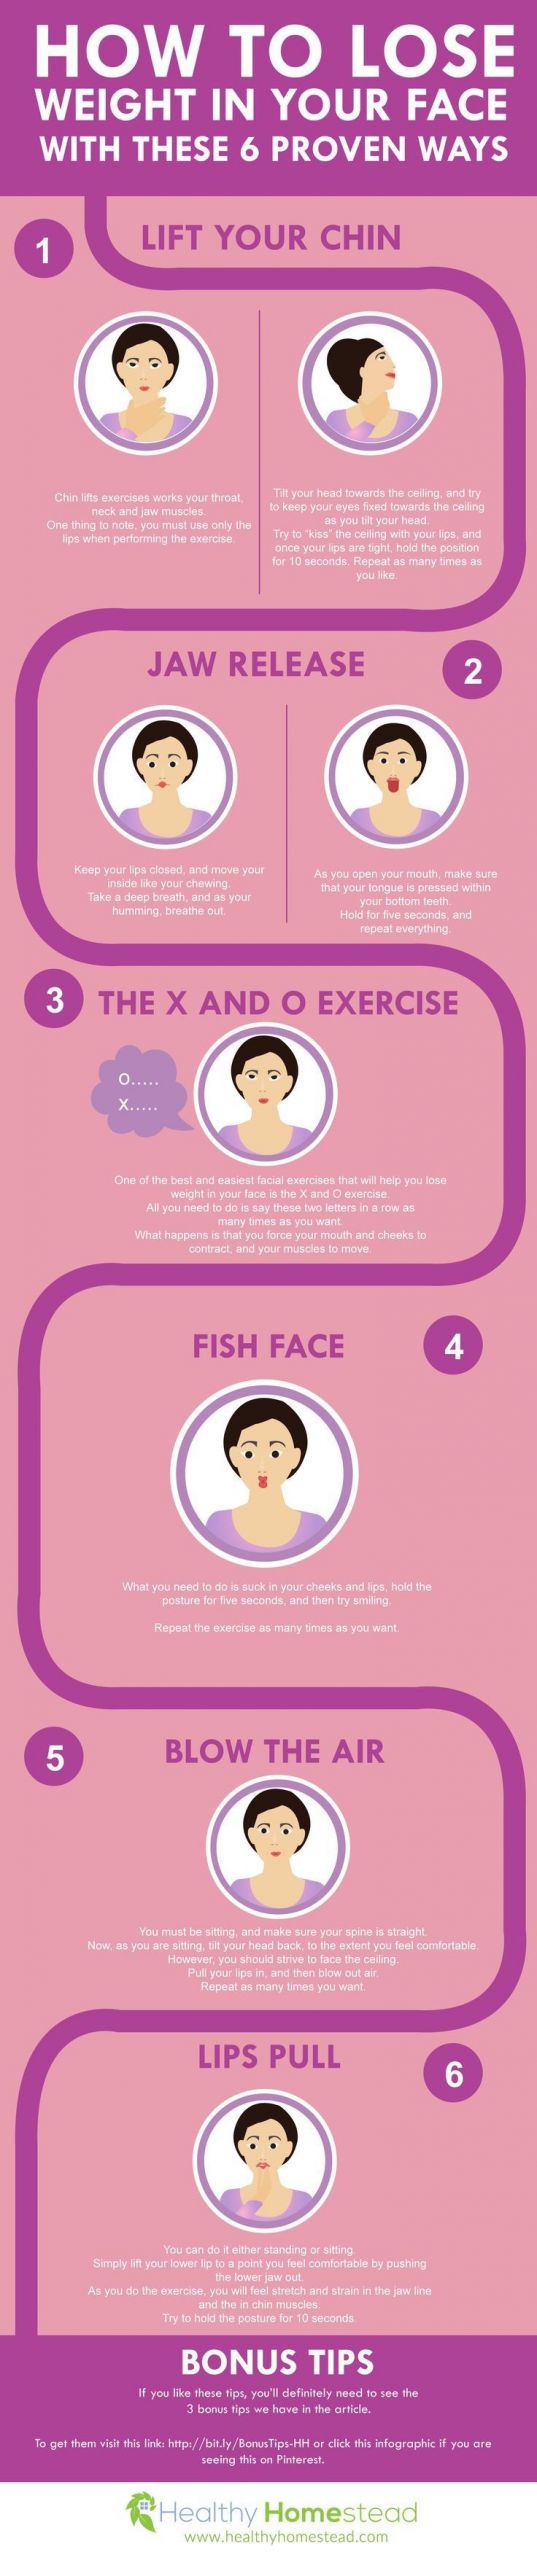 How To Lose Weight From Face
 118 best images about facial exercises on Pinterest